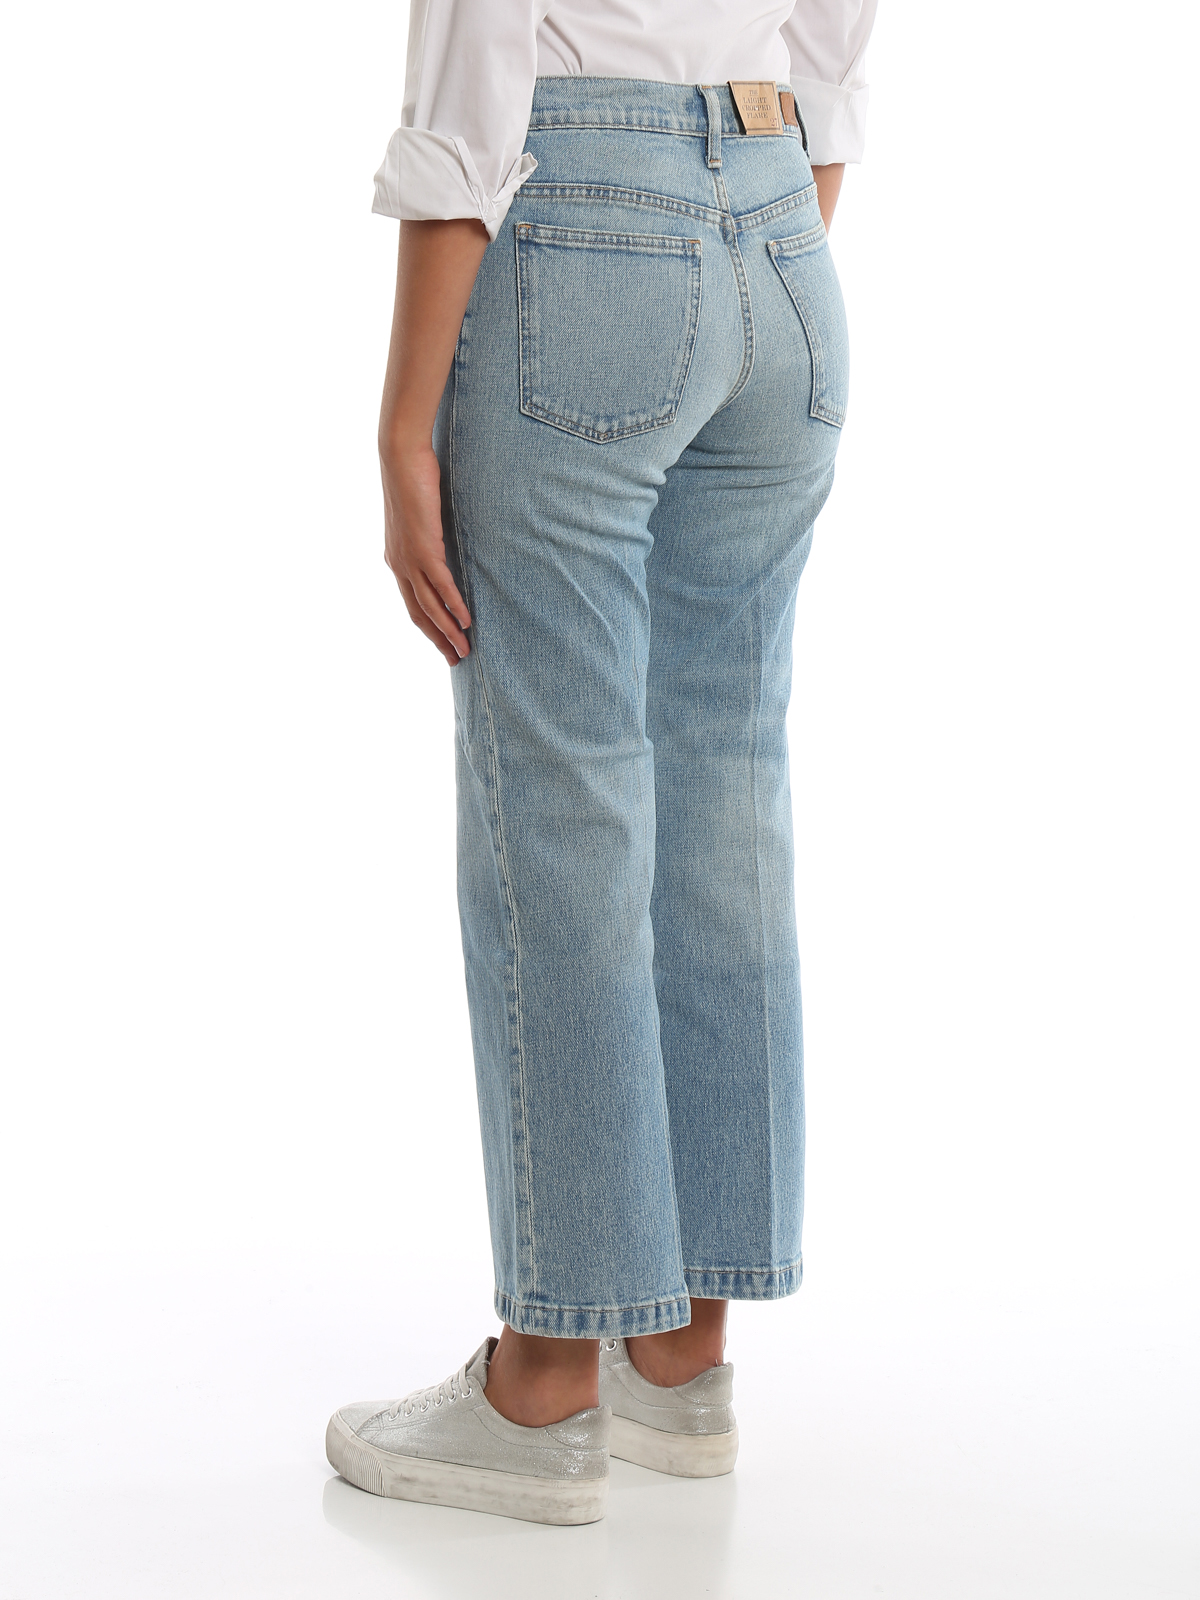 Mentaliteit piano baas Flared jeans Polo Ralph Lauren - Laight crop flare jeans - 211750479001